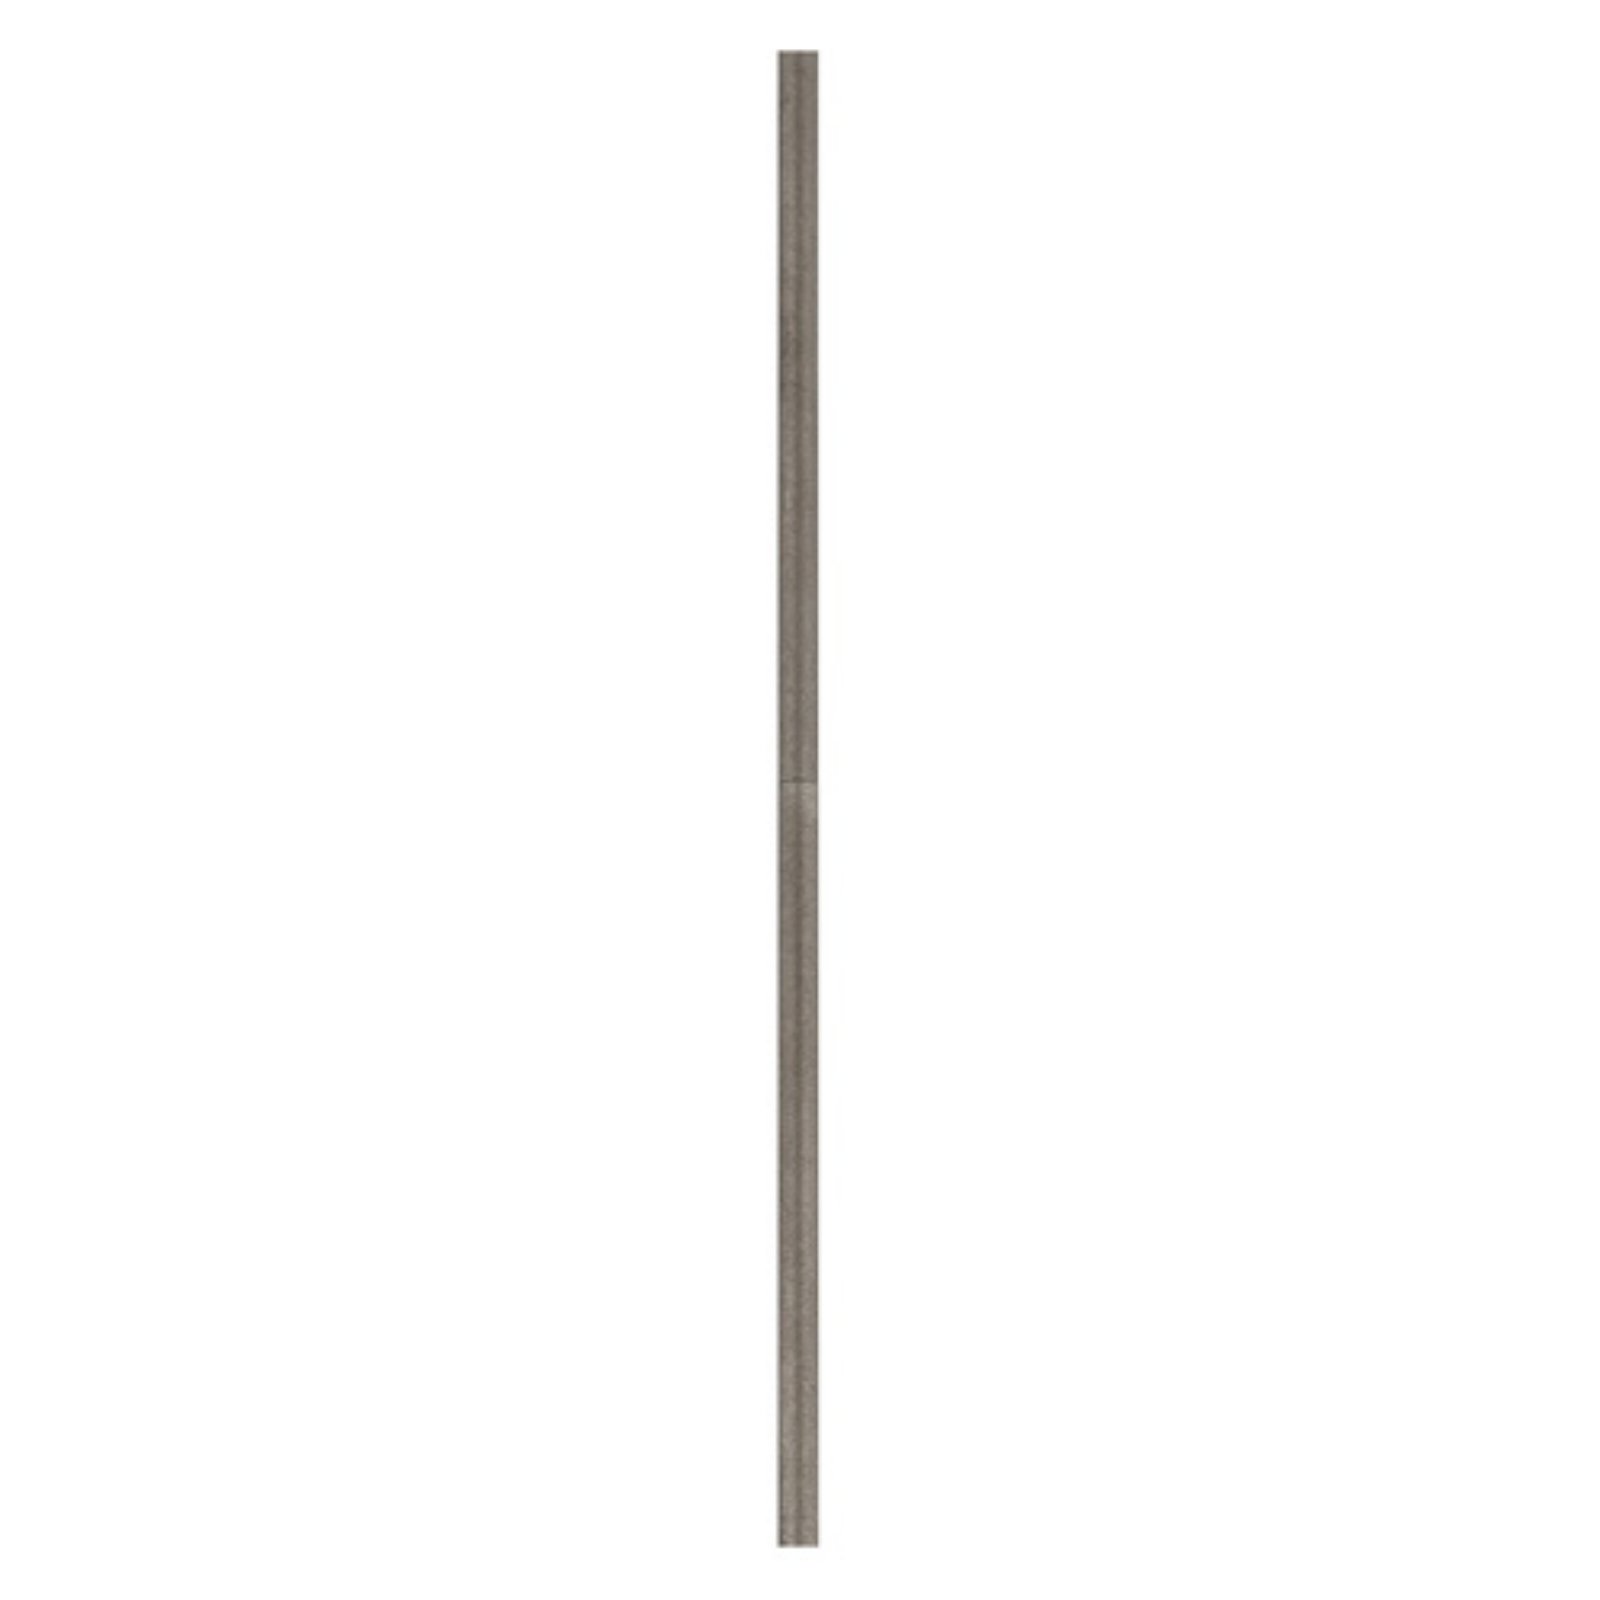 Savoy House DR-60-242 60" Down Rod in Aged Steel